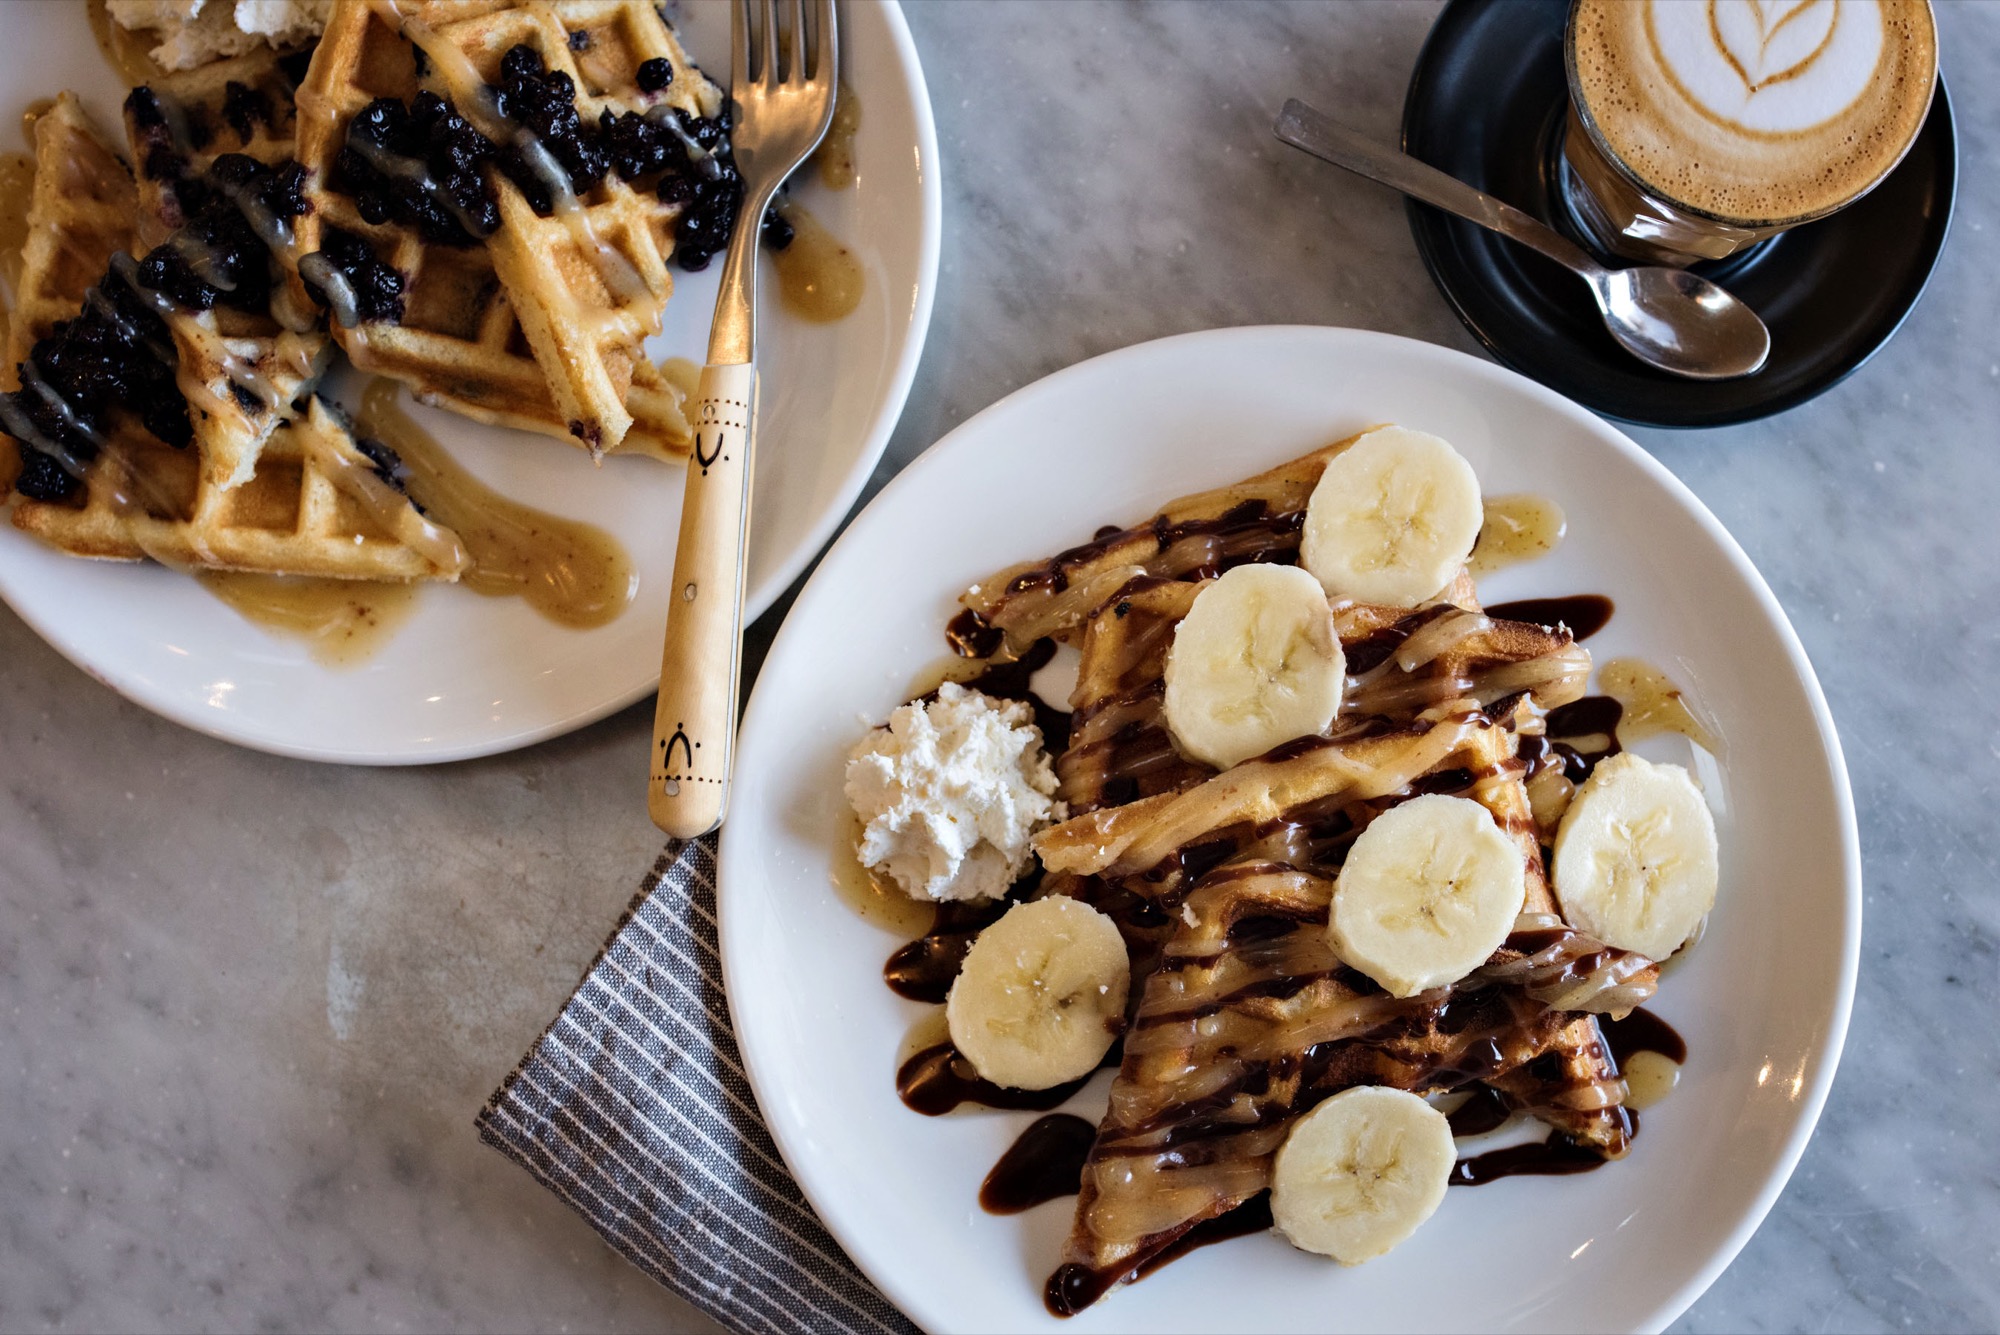 L: Blueberry Waffle with maple brown butter / R: Nutella Banana Waffle with maple brown butter / Photo by D'Ann McCormick Boal